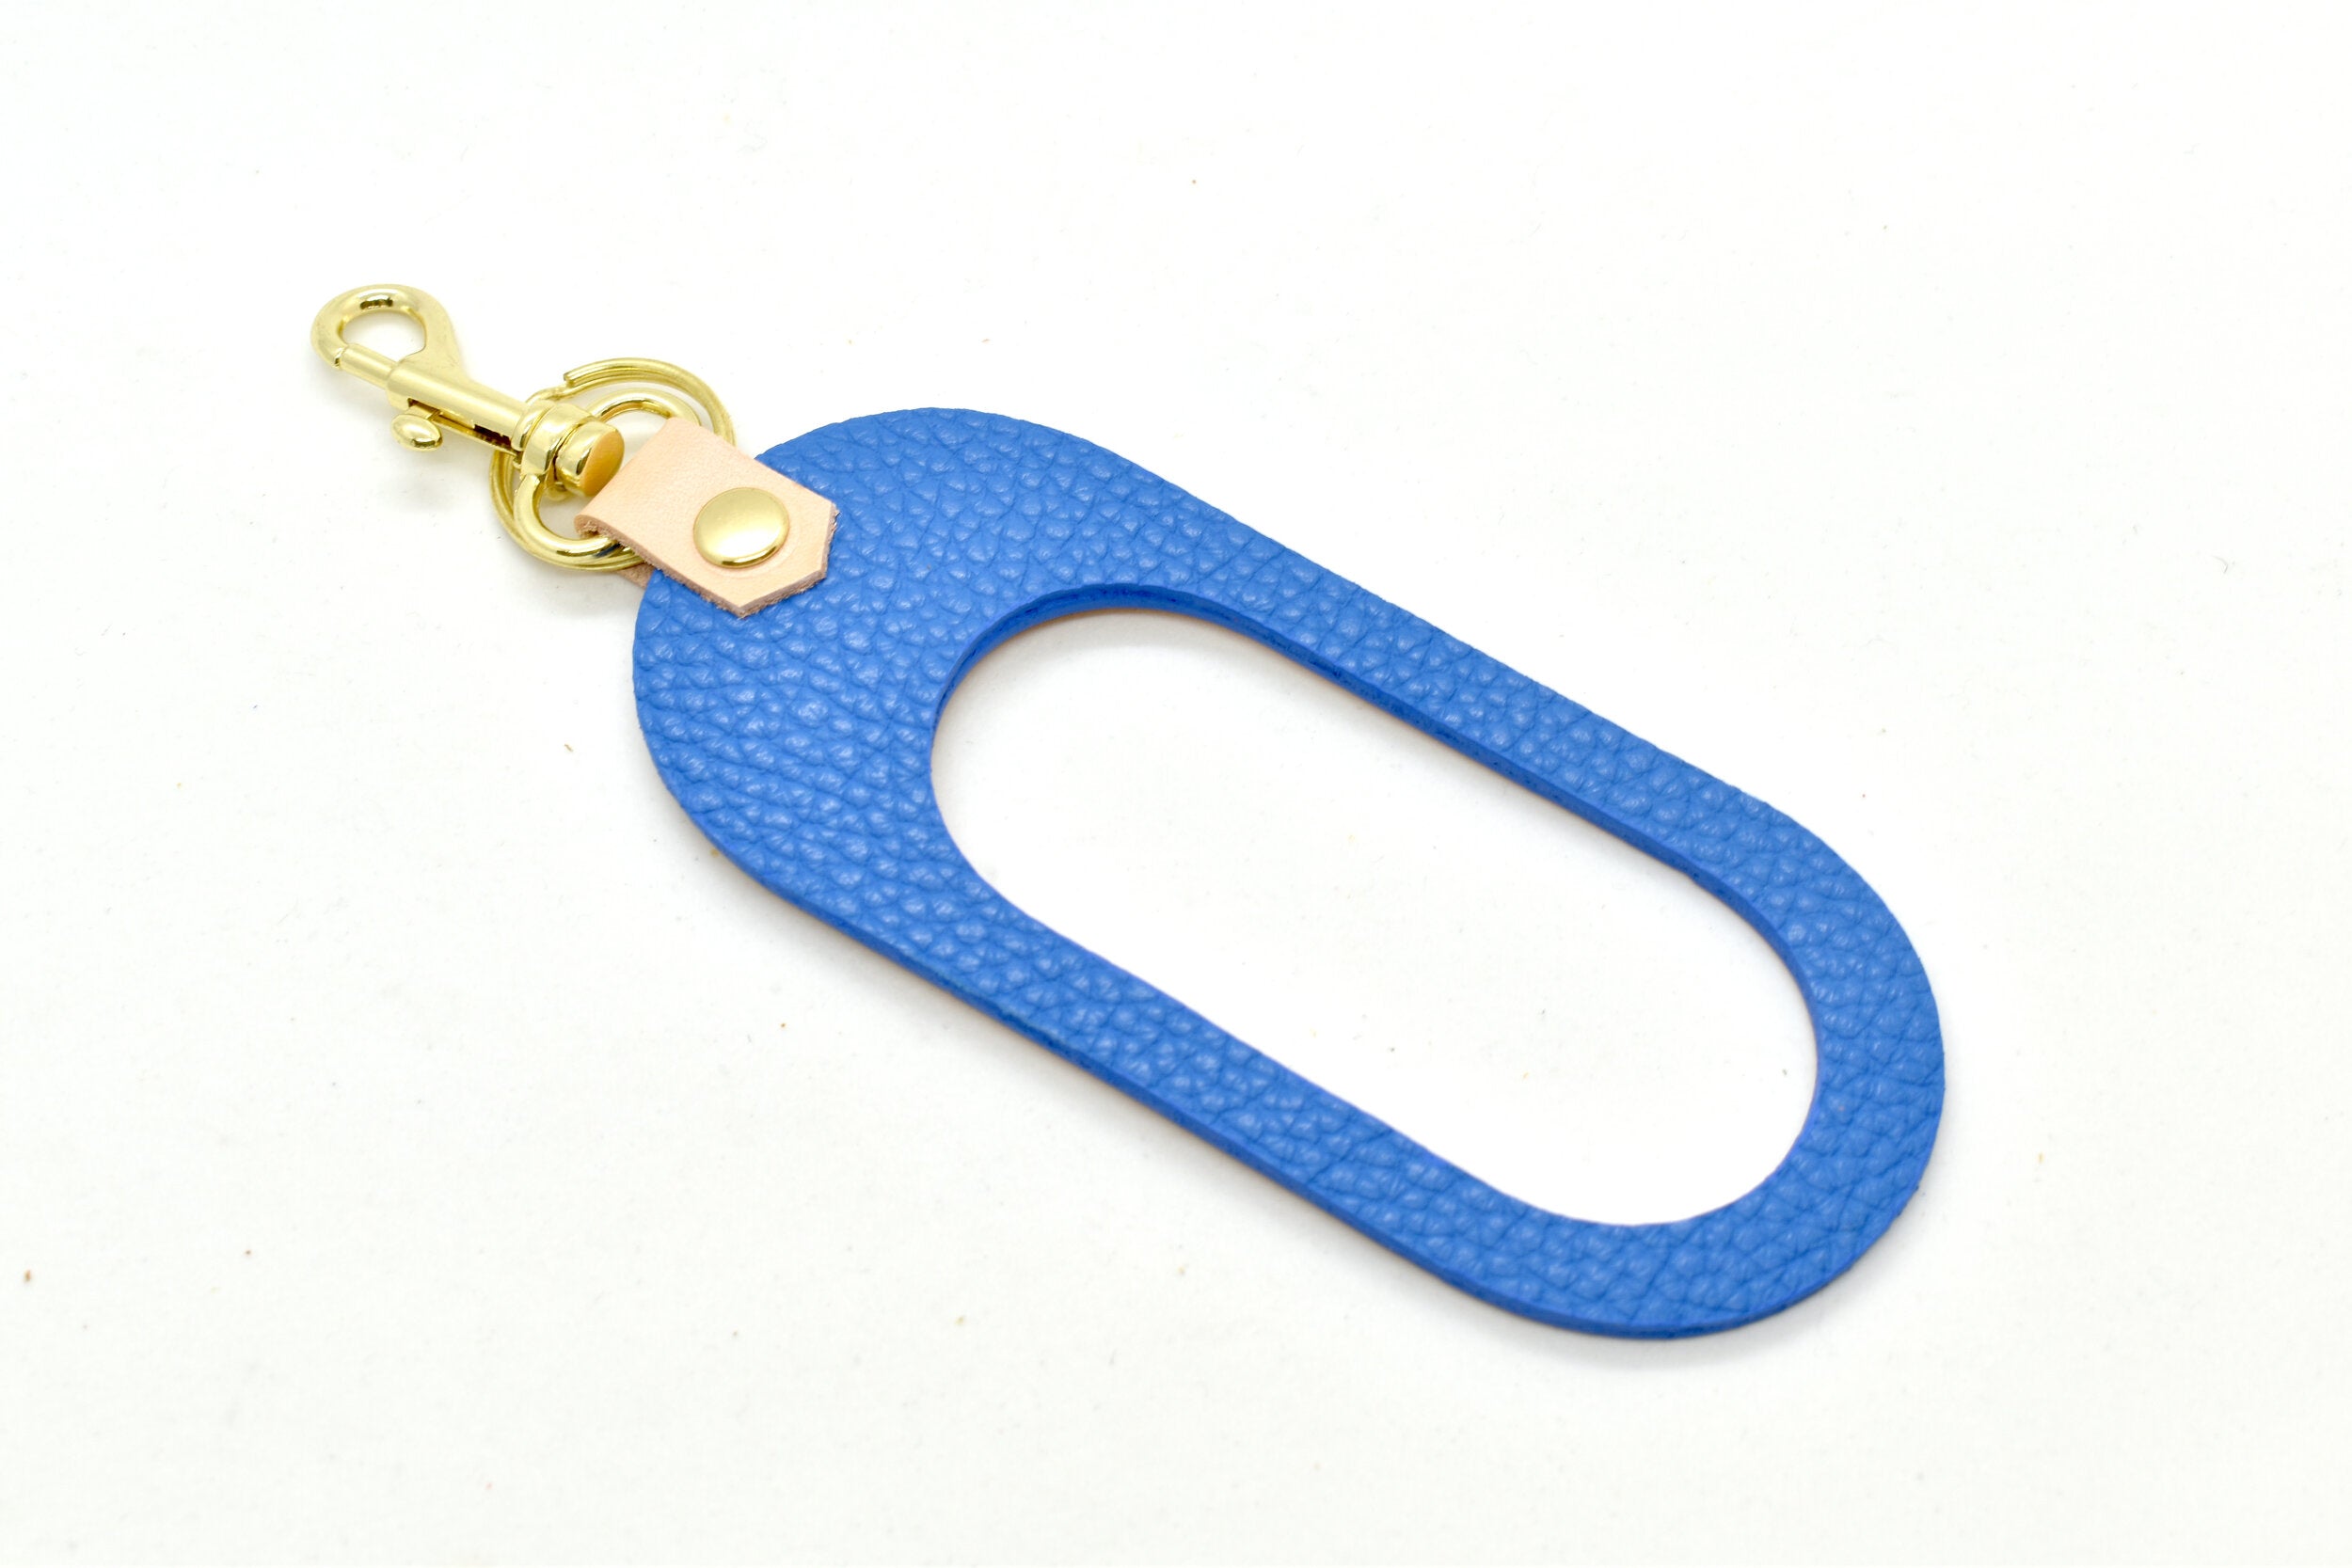 vegetable tanned rawhide and bright bold matisse blue leather finish keychain with gold hardware